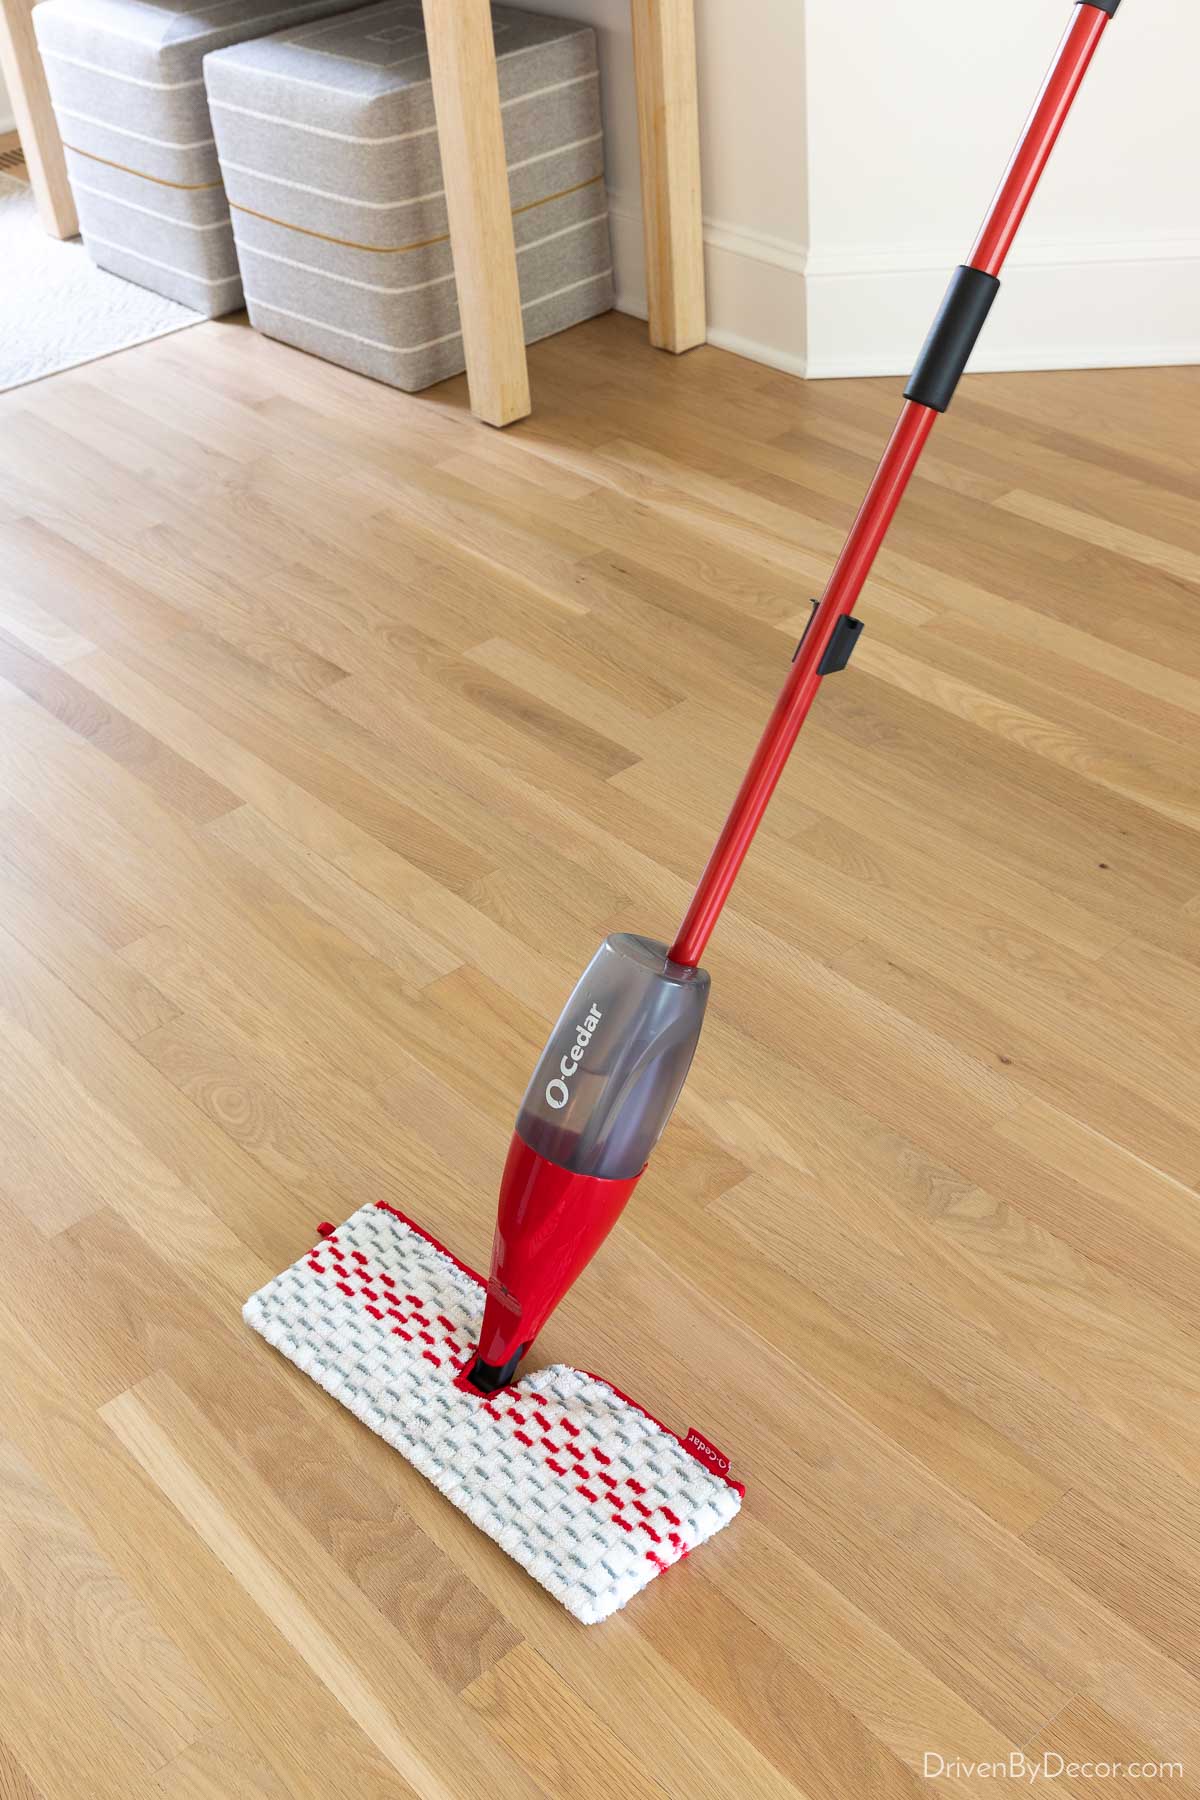 The best way to mop hardwood floors: 5 tips from the pros